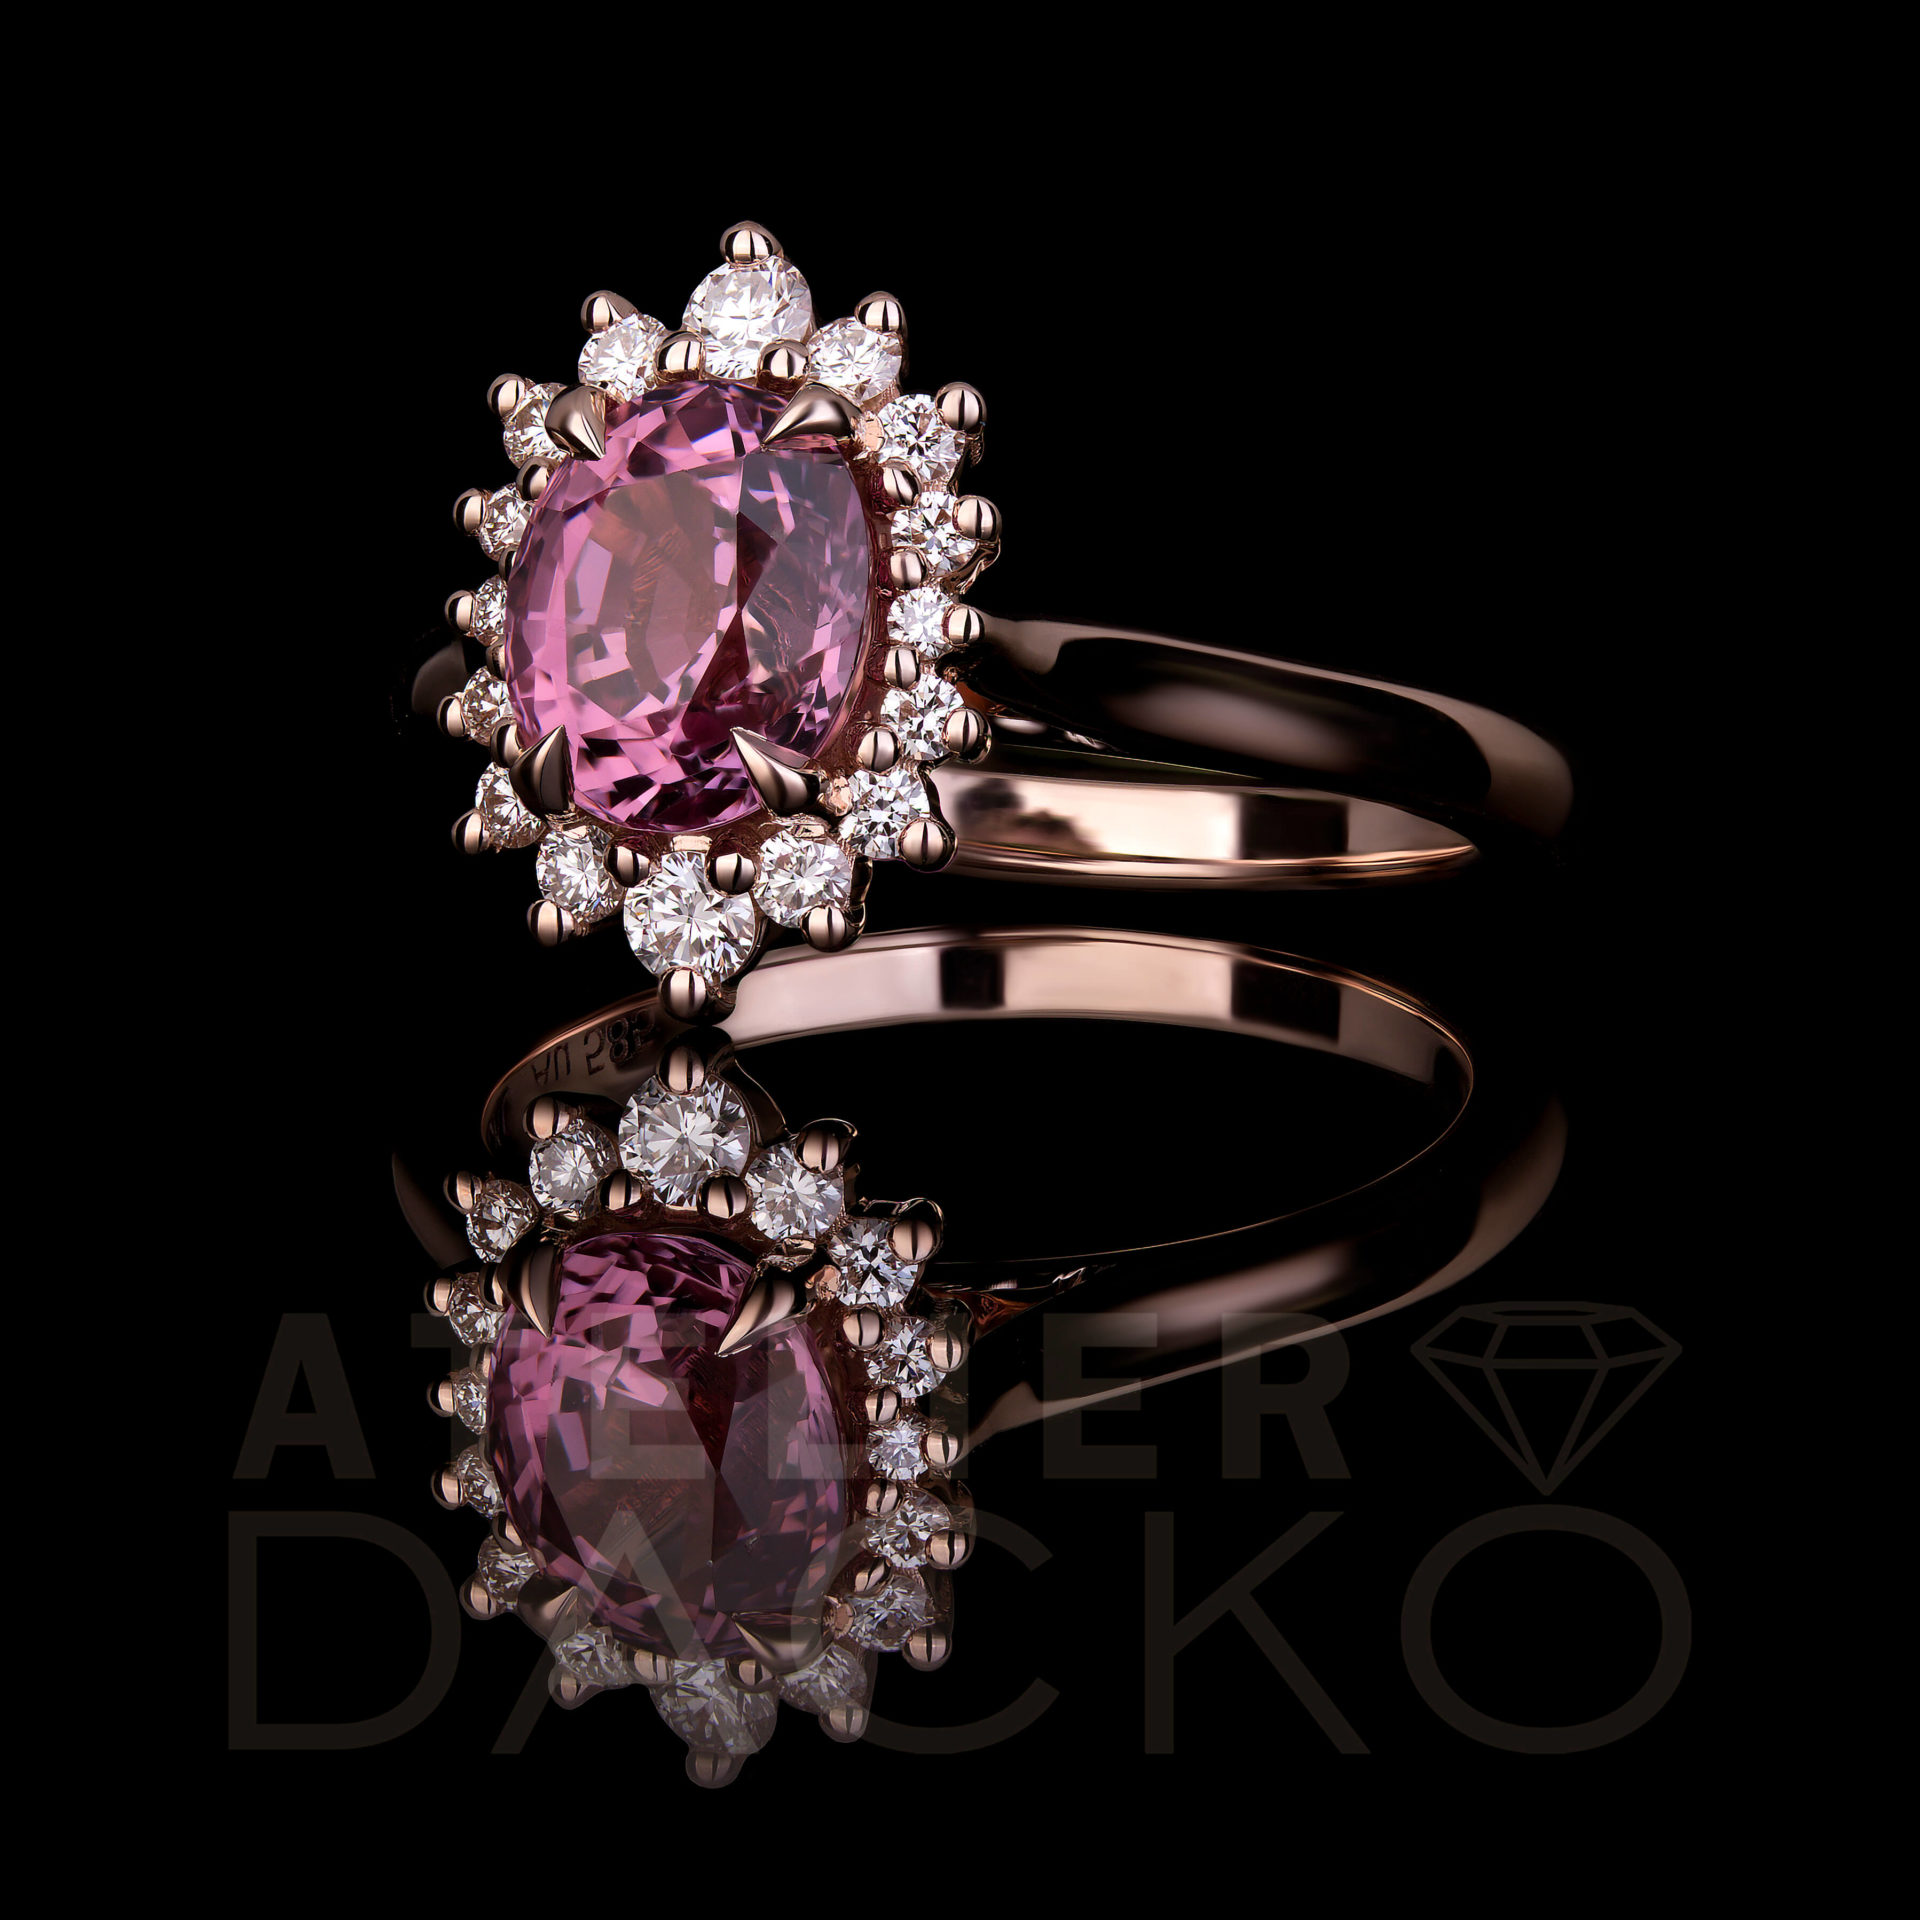 Side Facing 1.43 CT Pink Oval Spinel with Floral Halo Ring